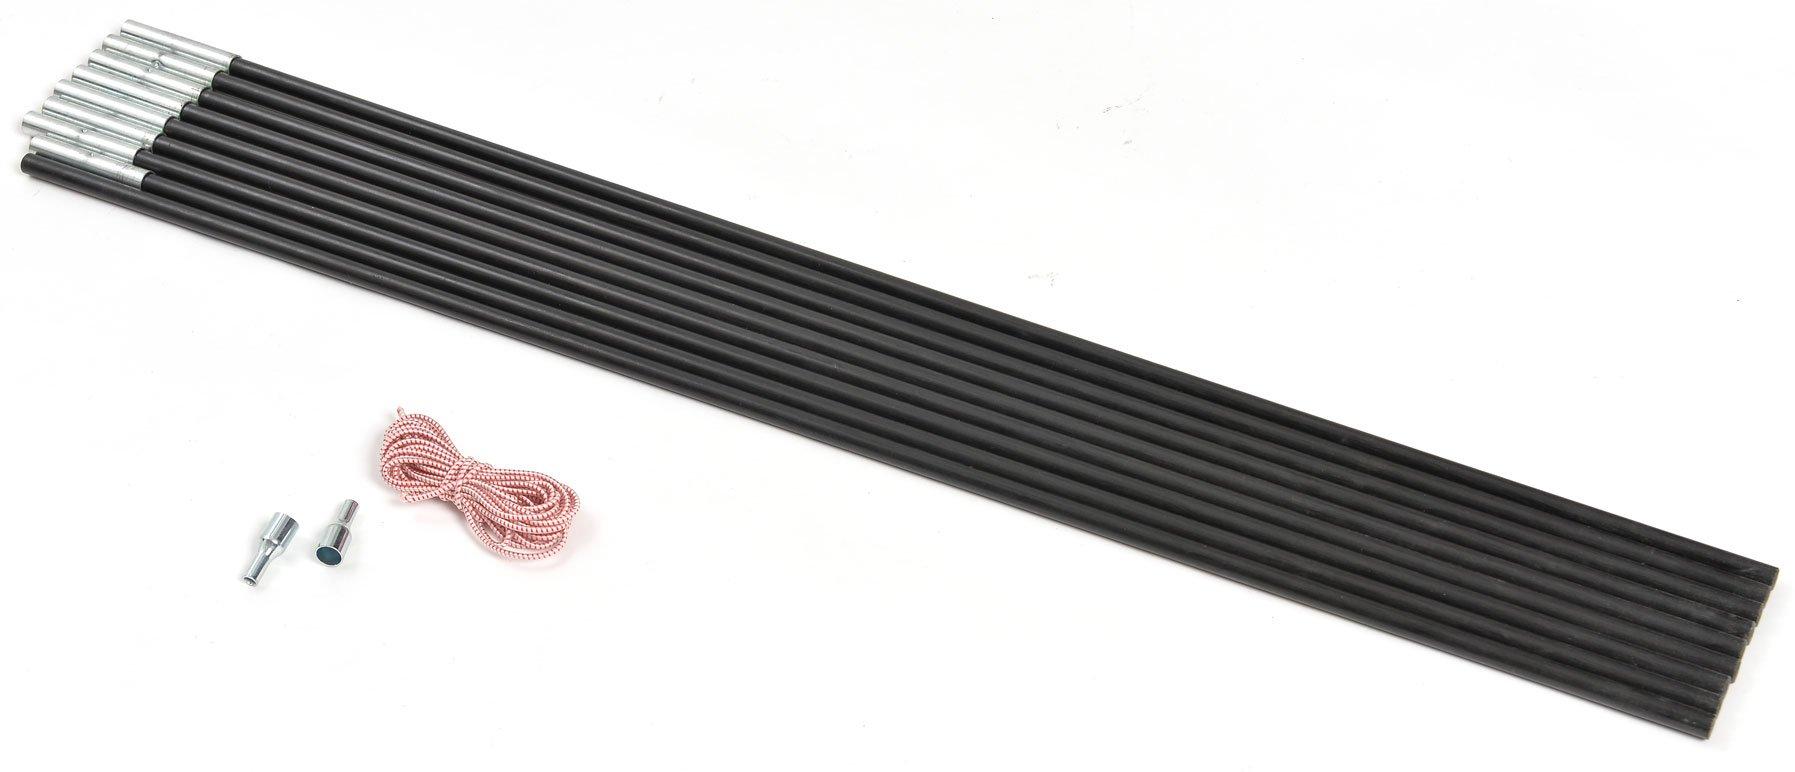 New HI-GEAR Stratus 400 Replacement Rear Storm Pole